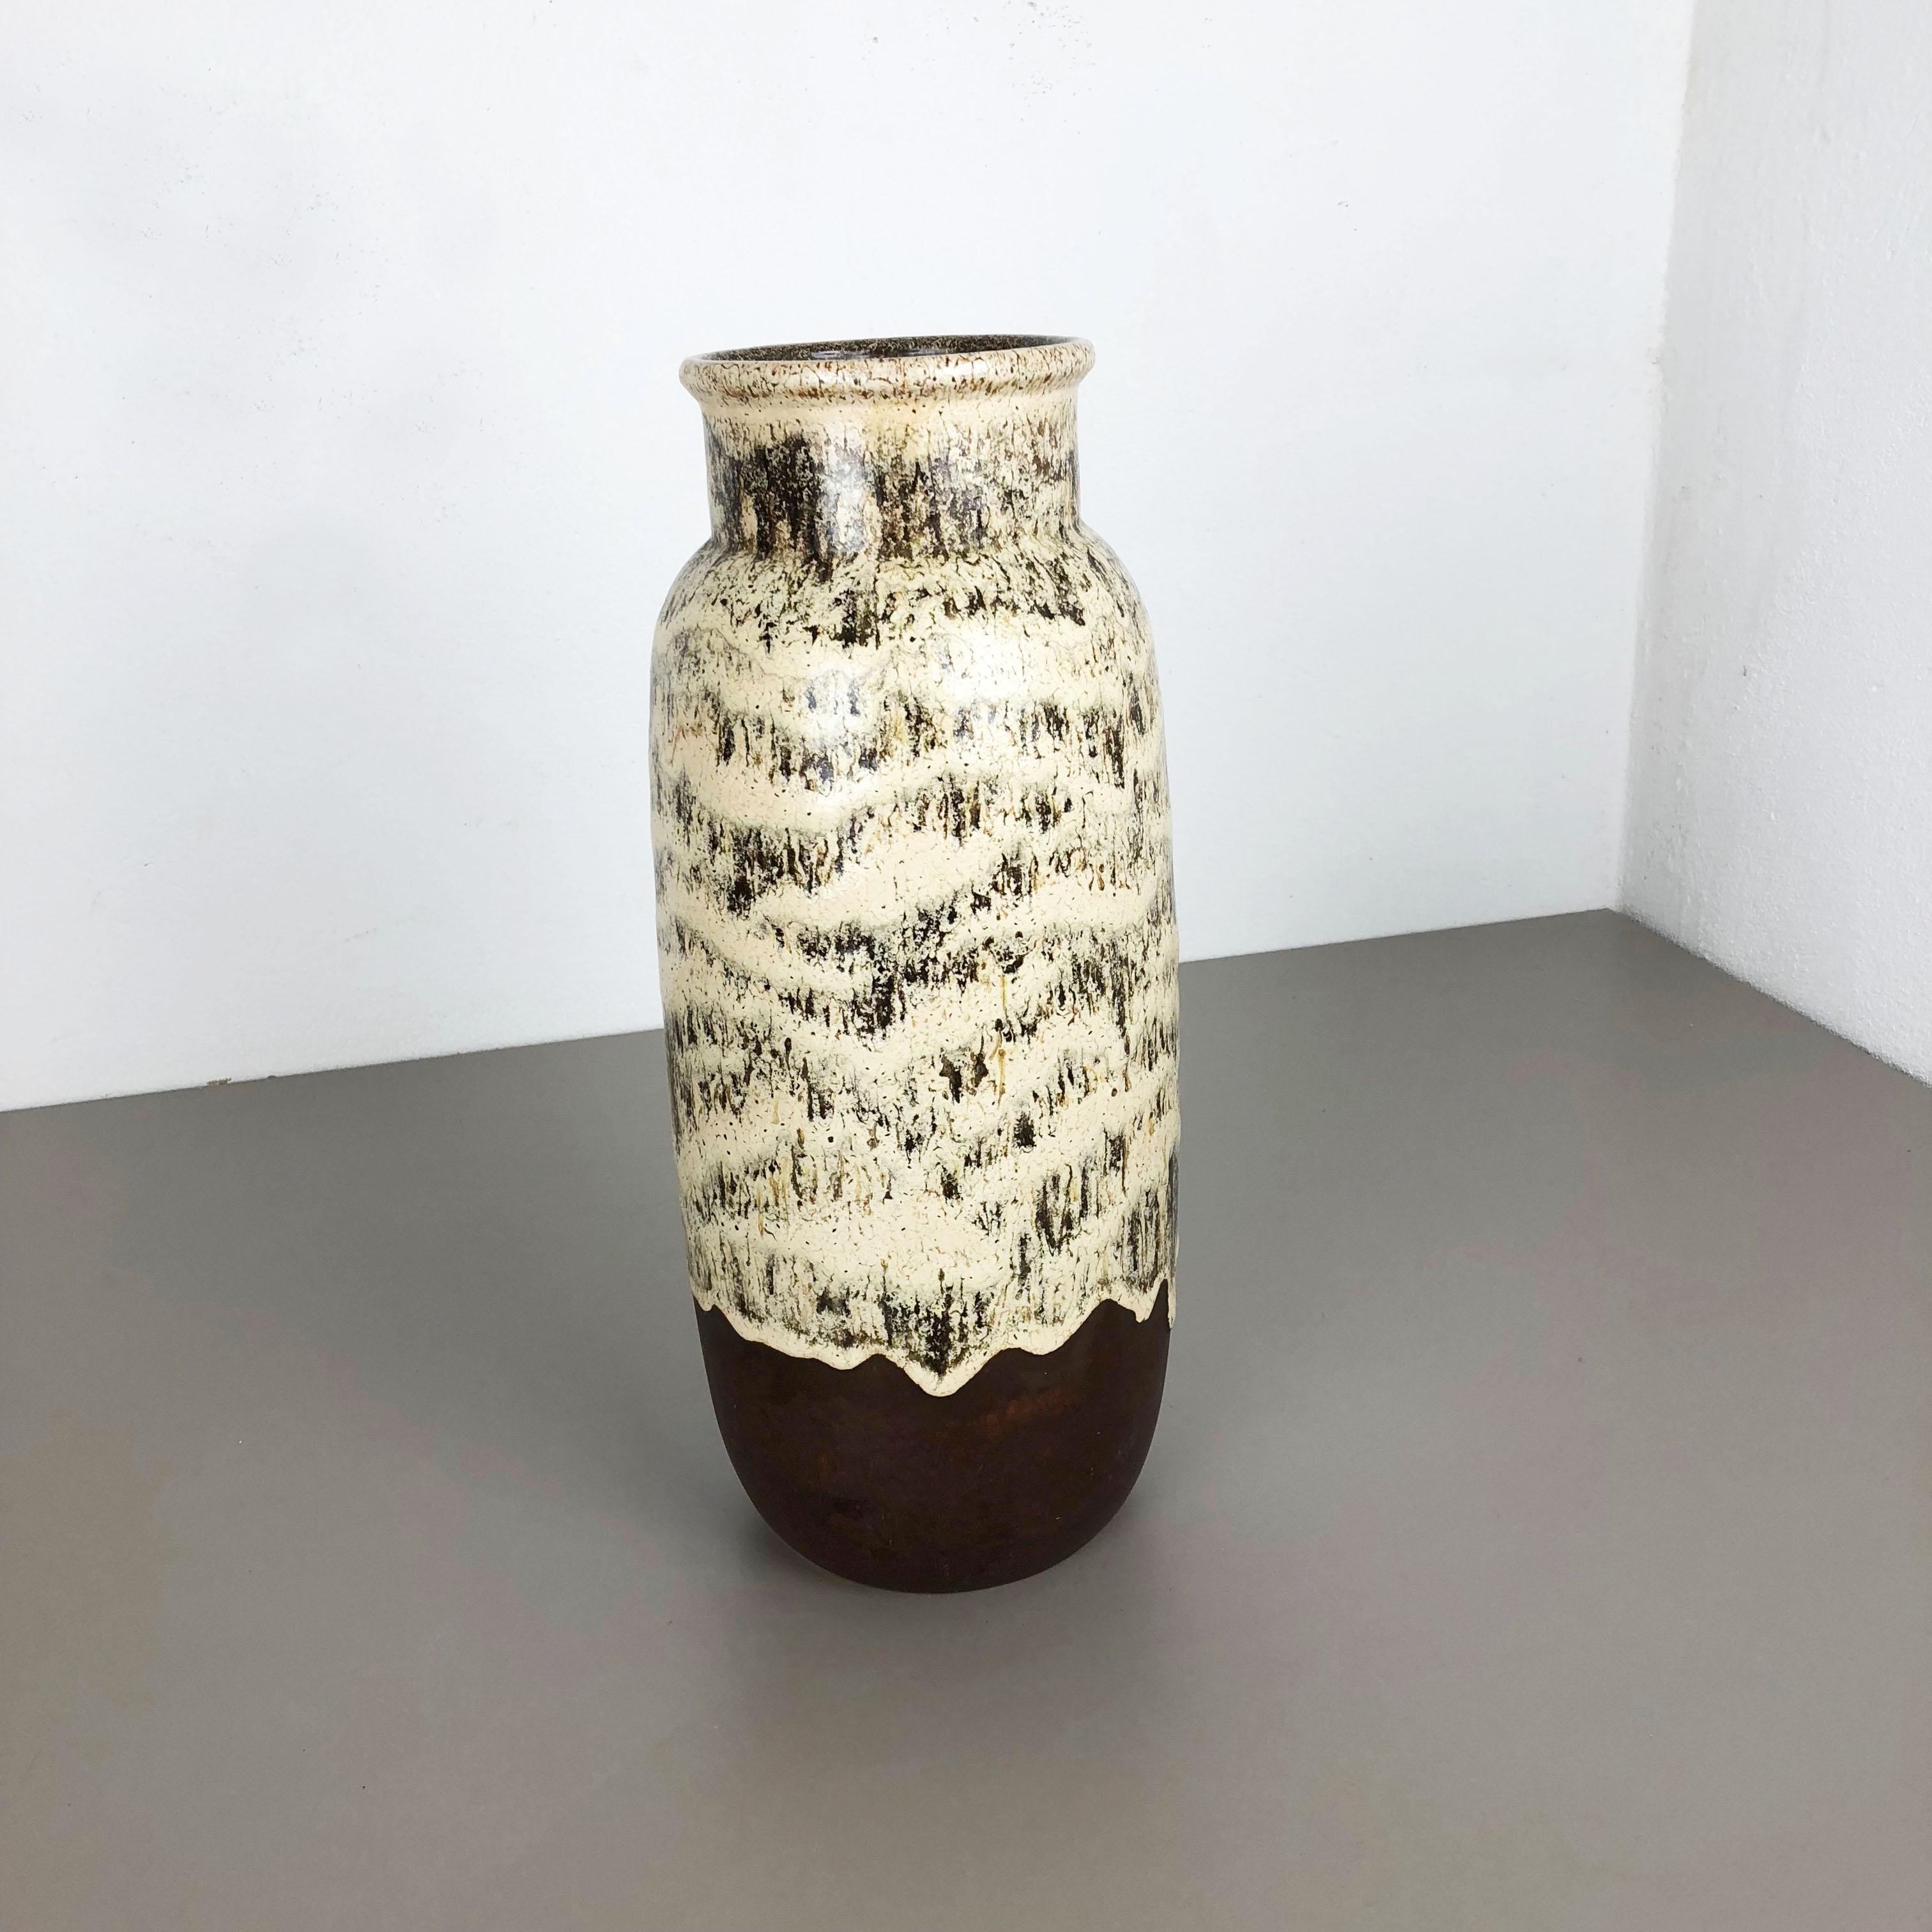 Article:

Fat lava art vase XL version


Model: 204-41


Producer:

Scheurich, Germany



Decade:

1970s


Description:

This original vintage vase was produced in the 1970s in Germany. it is made of ceramic pottery in fat lava